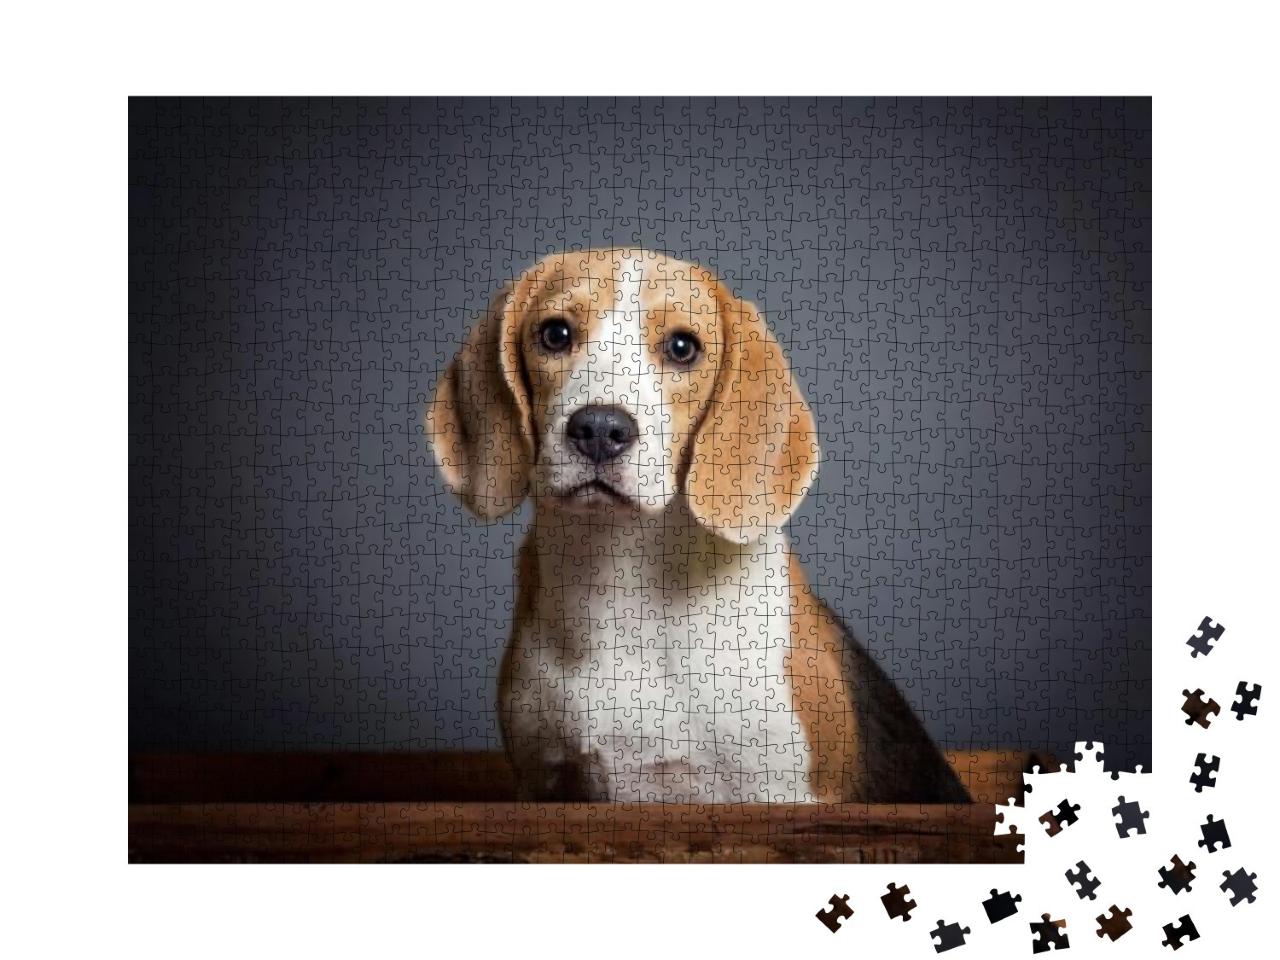 Adorable Portrait of a Blue Beagle Puppy... Jigsaw Puzzle with 1000 pieces